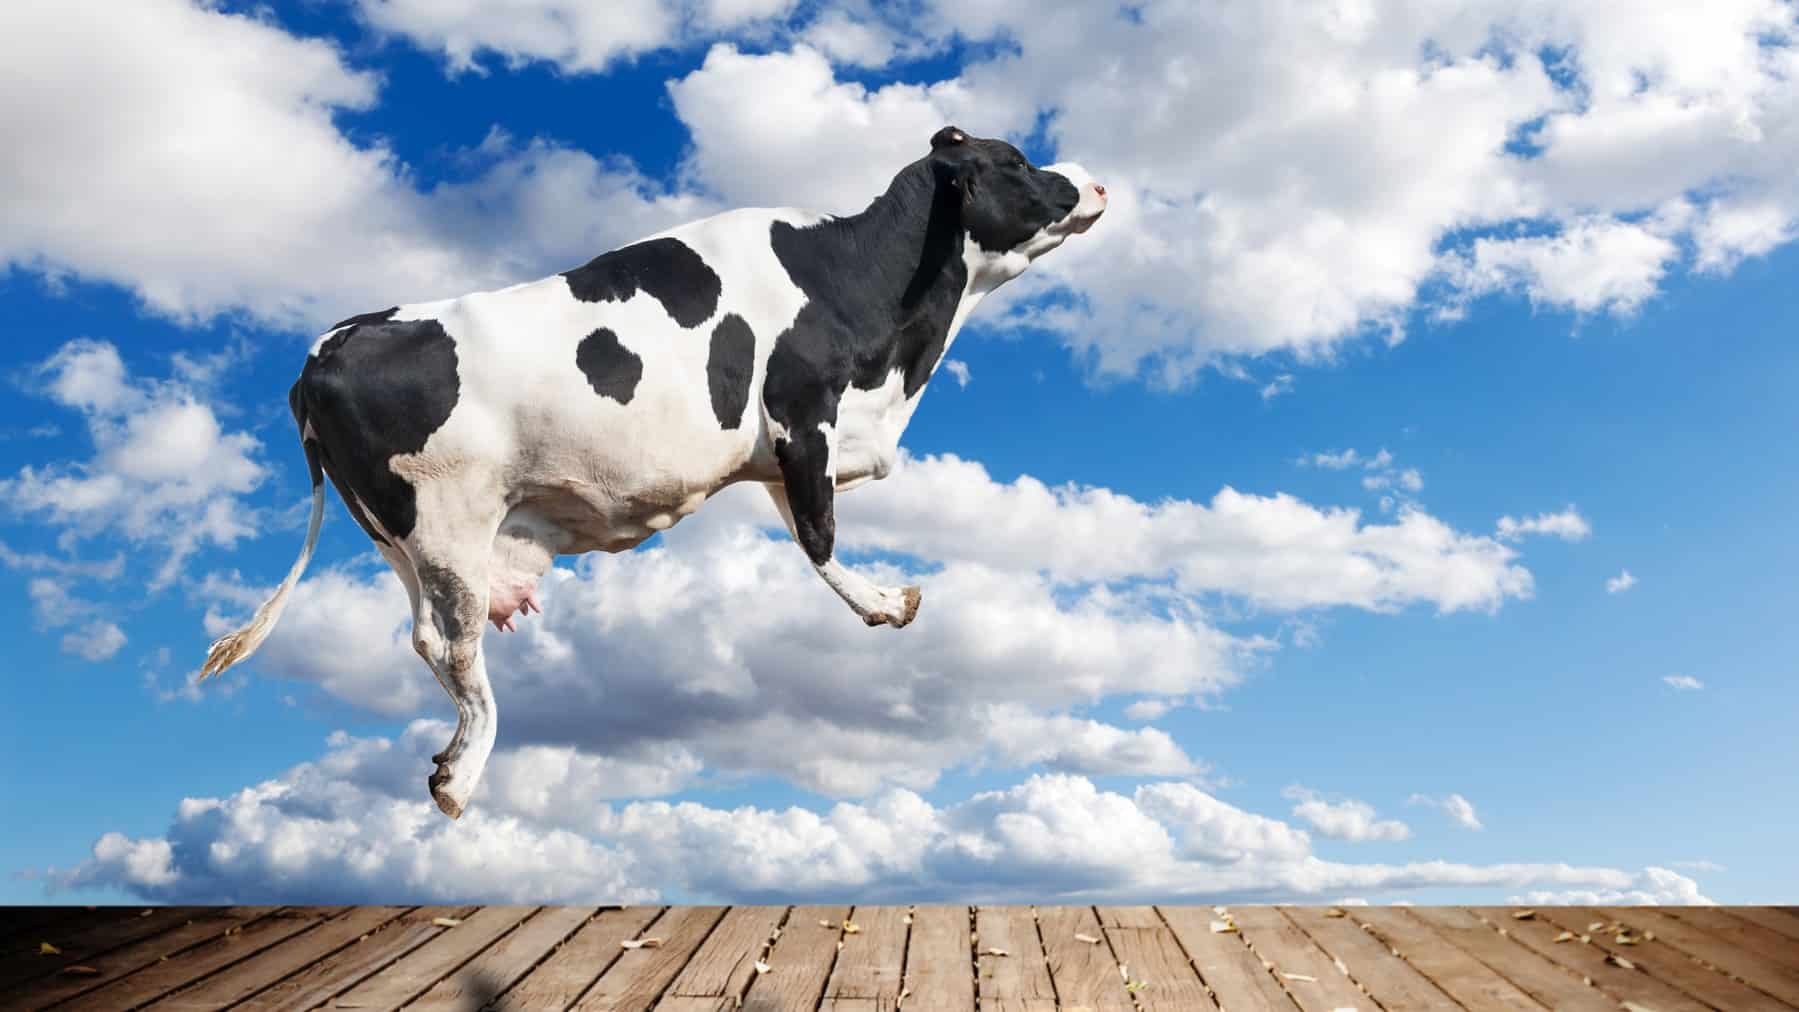 A cow leaps into air in front of a cloudy sky.